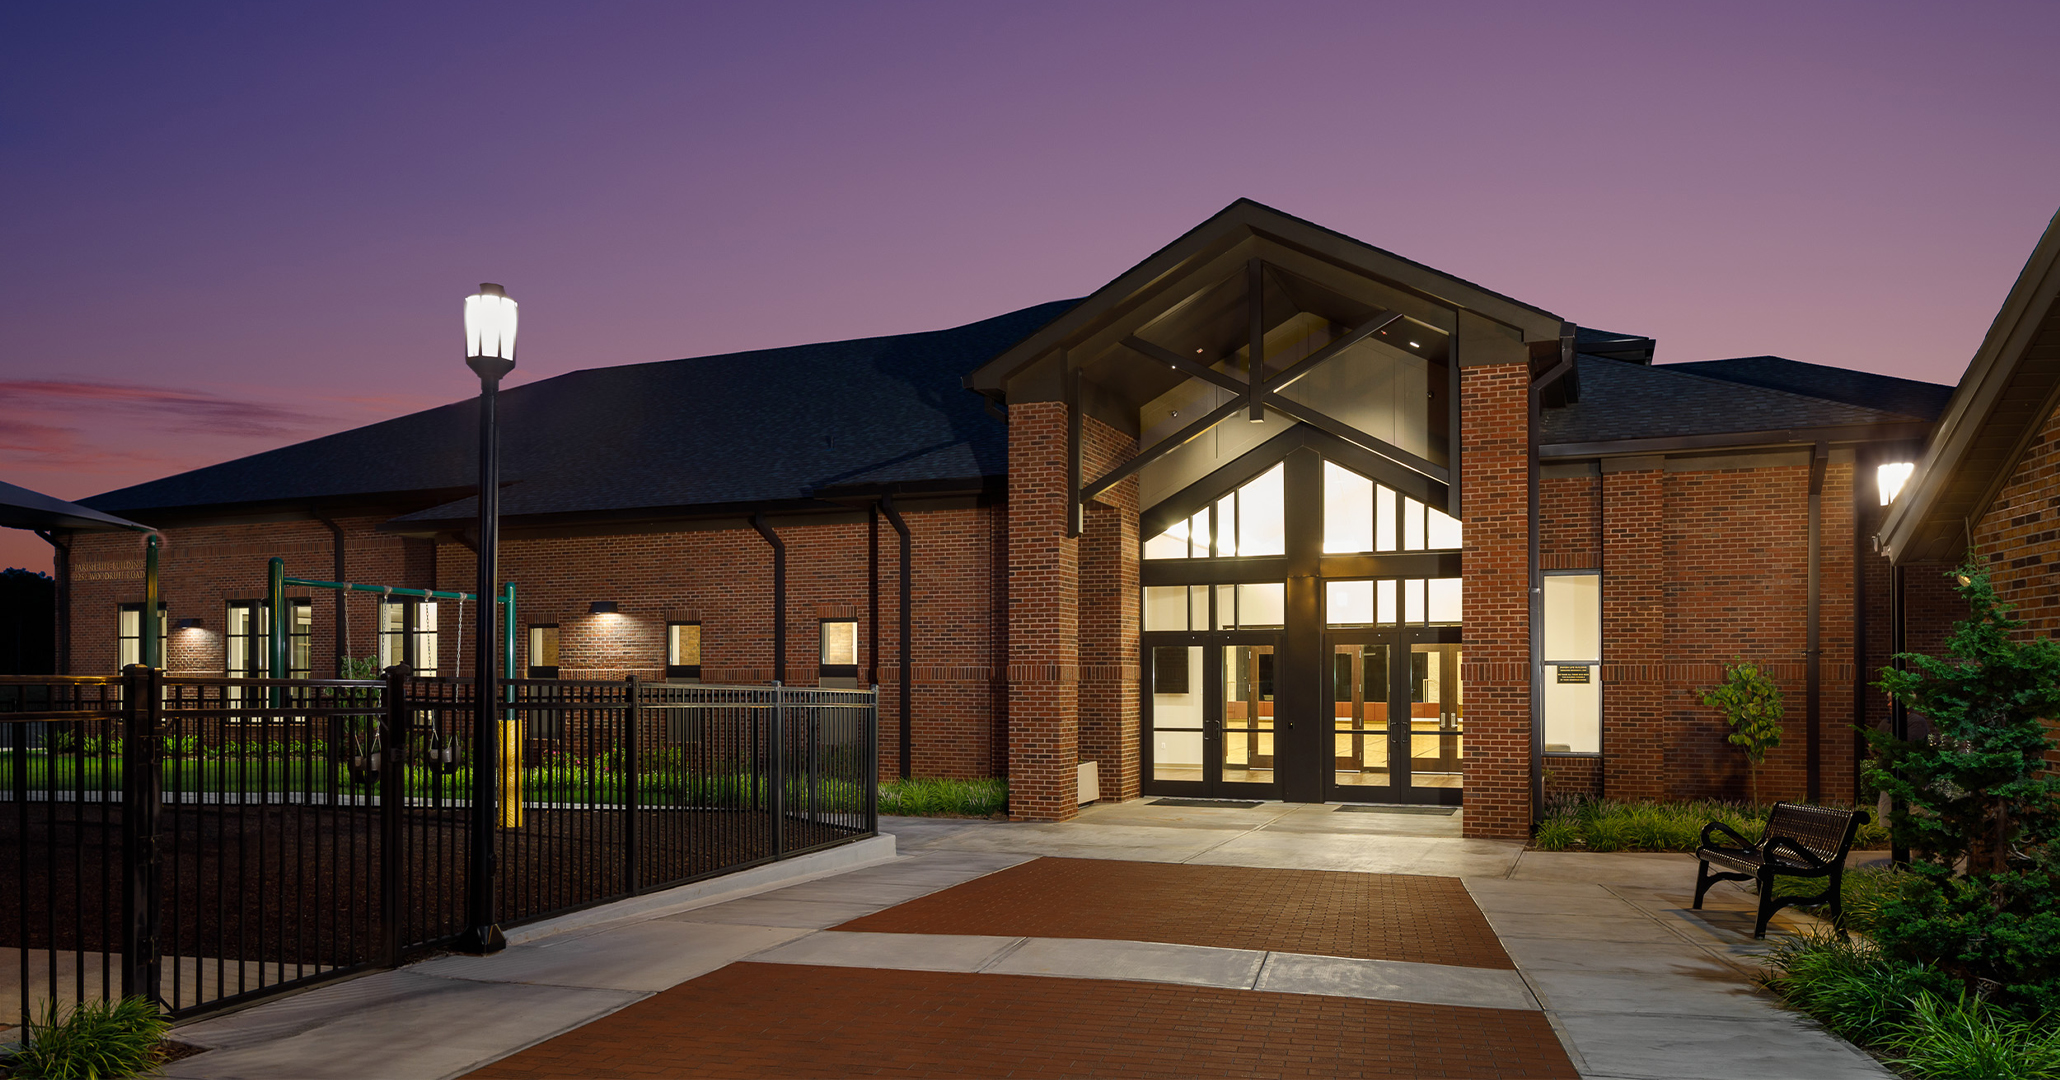 The Charleston Diocese and St Mary Magdalene Catholic Church in Simpsonville, SC is working with church architects Boudreaux to design the Parish Life Building.